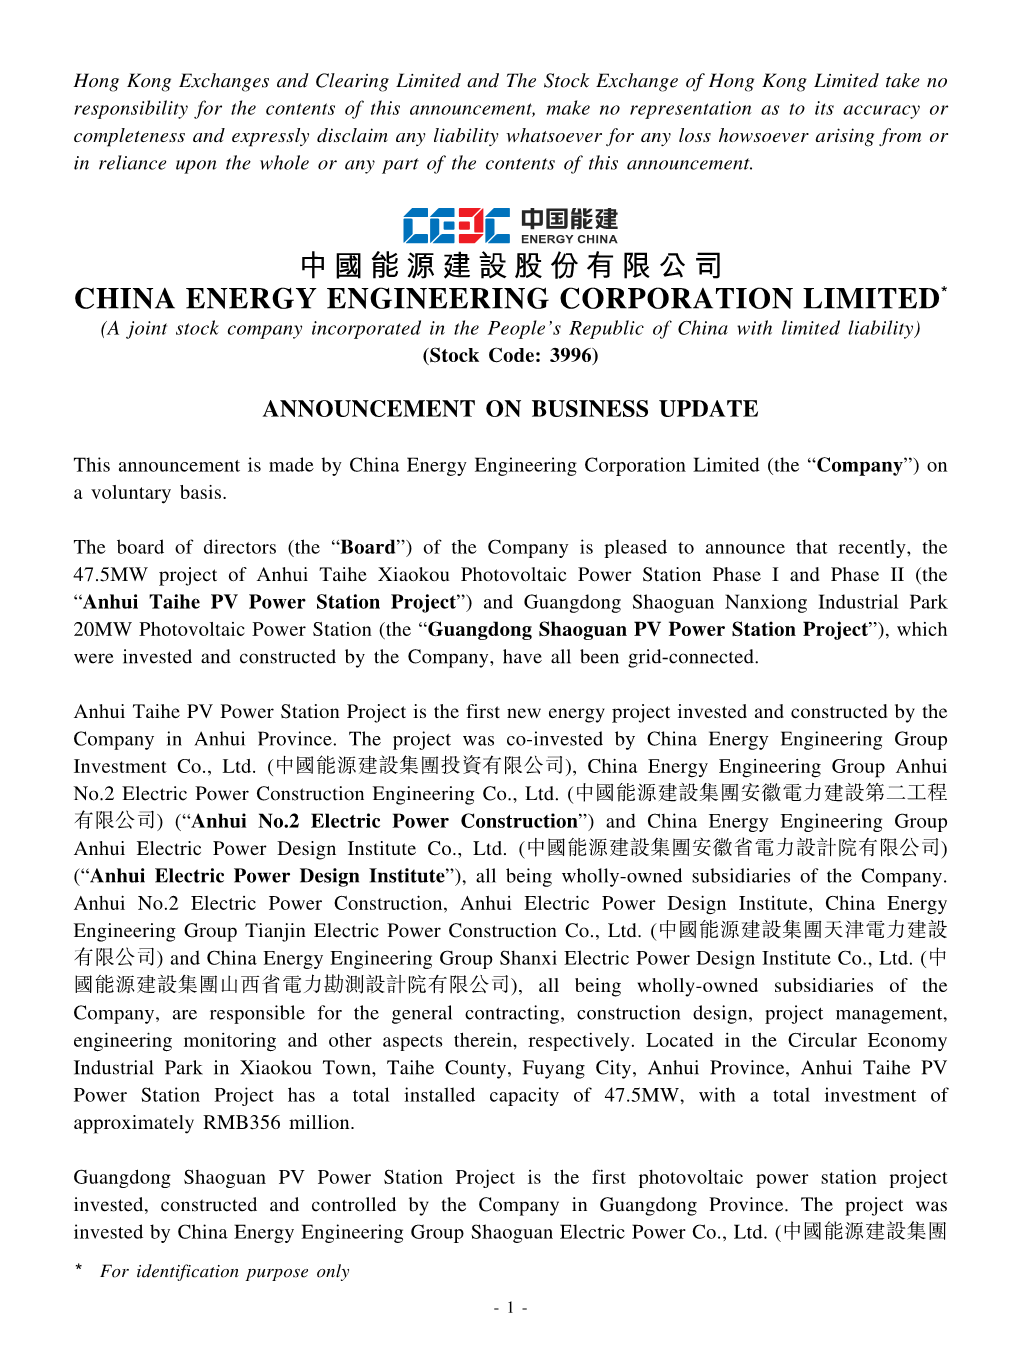 CHINA ENERGY ENGINEERING CORPORATION LIMITED* (A Joint Stock Company Incorporated in the People’S Republic of China with Limited Liability) (Stock Code: 3996)